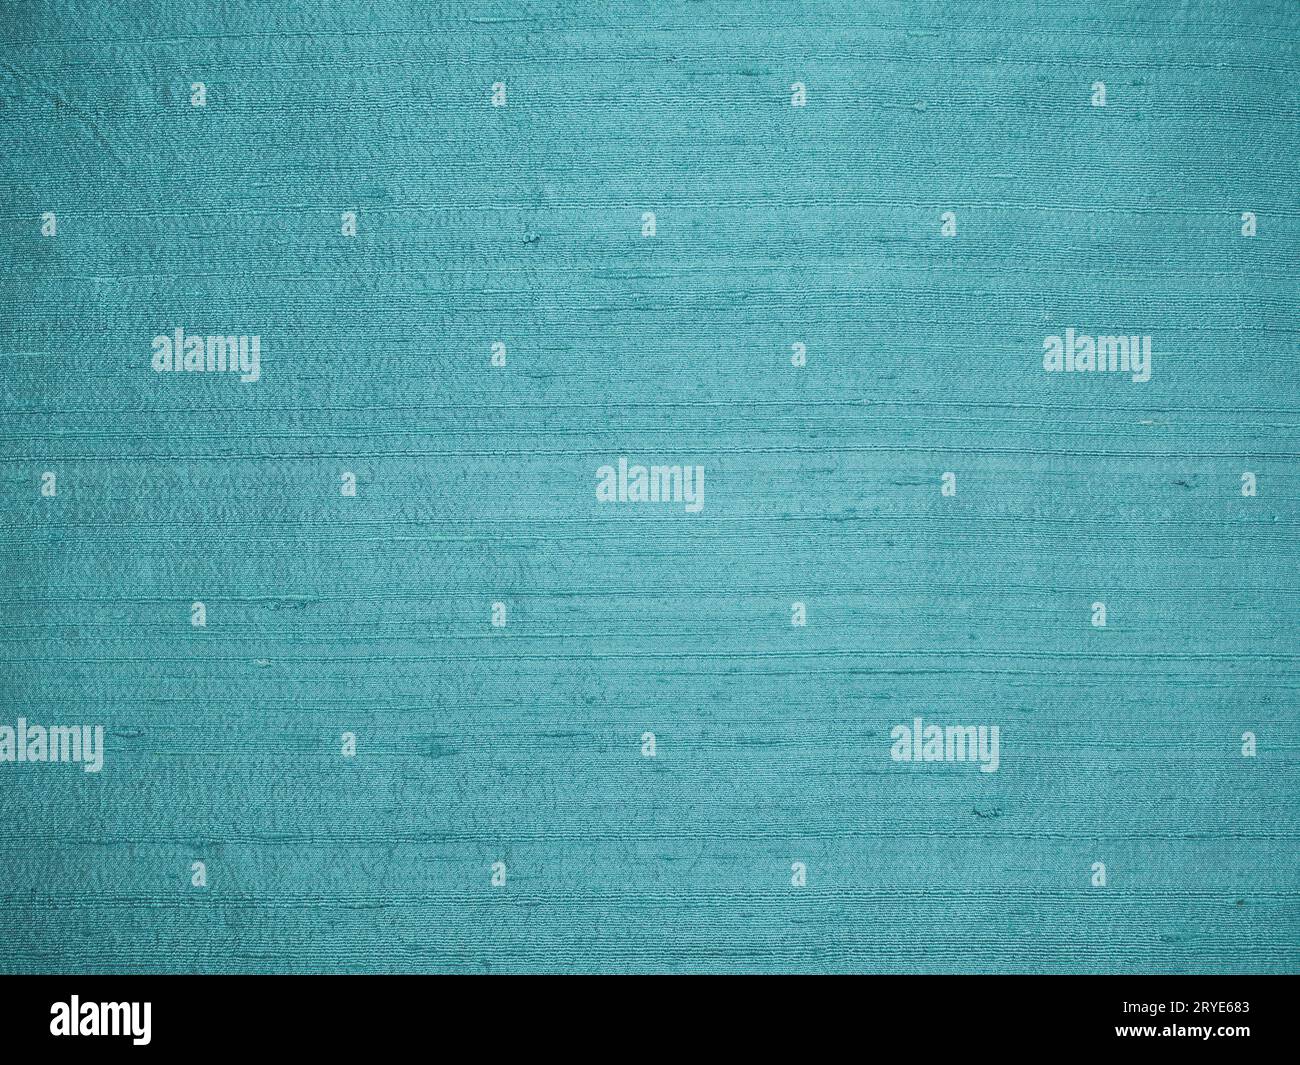 Faded blue dupioni silk fabric laid flat background for texture or text. Stock Photo